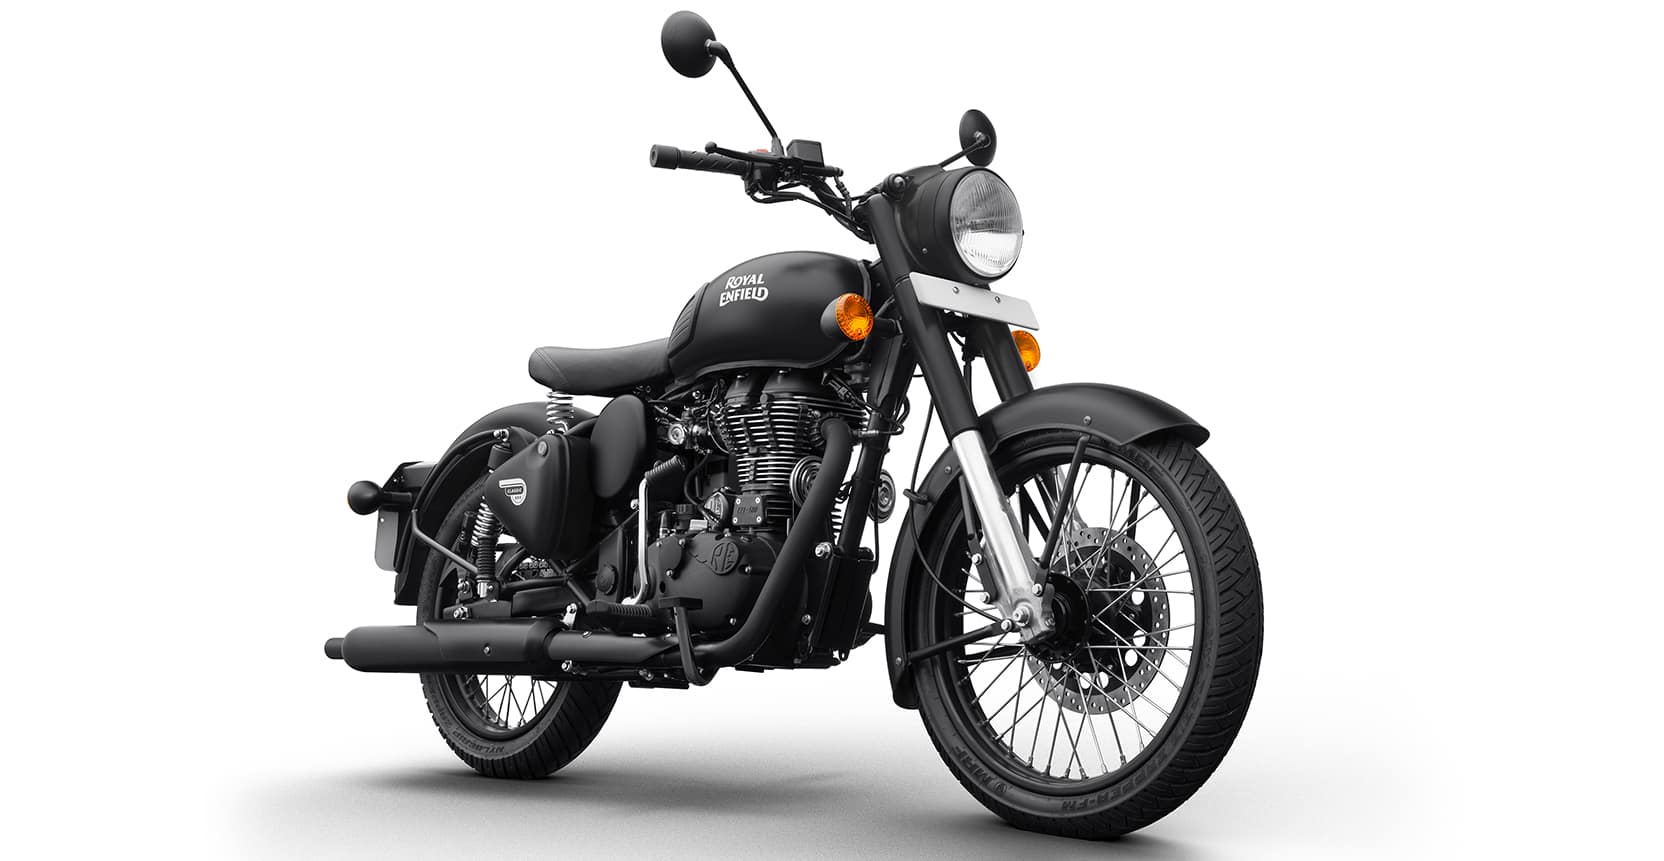 NSG commandos take RE Classic 500  Stealth Black edition for 7000 km expedition